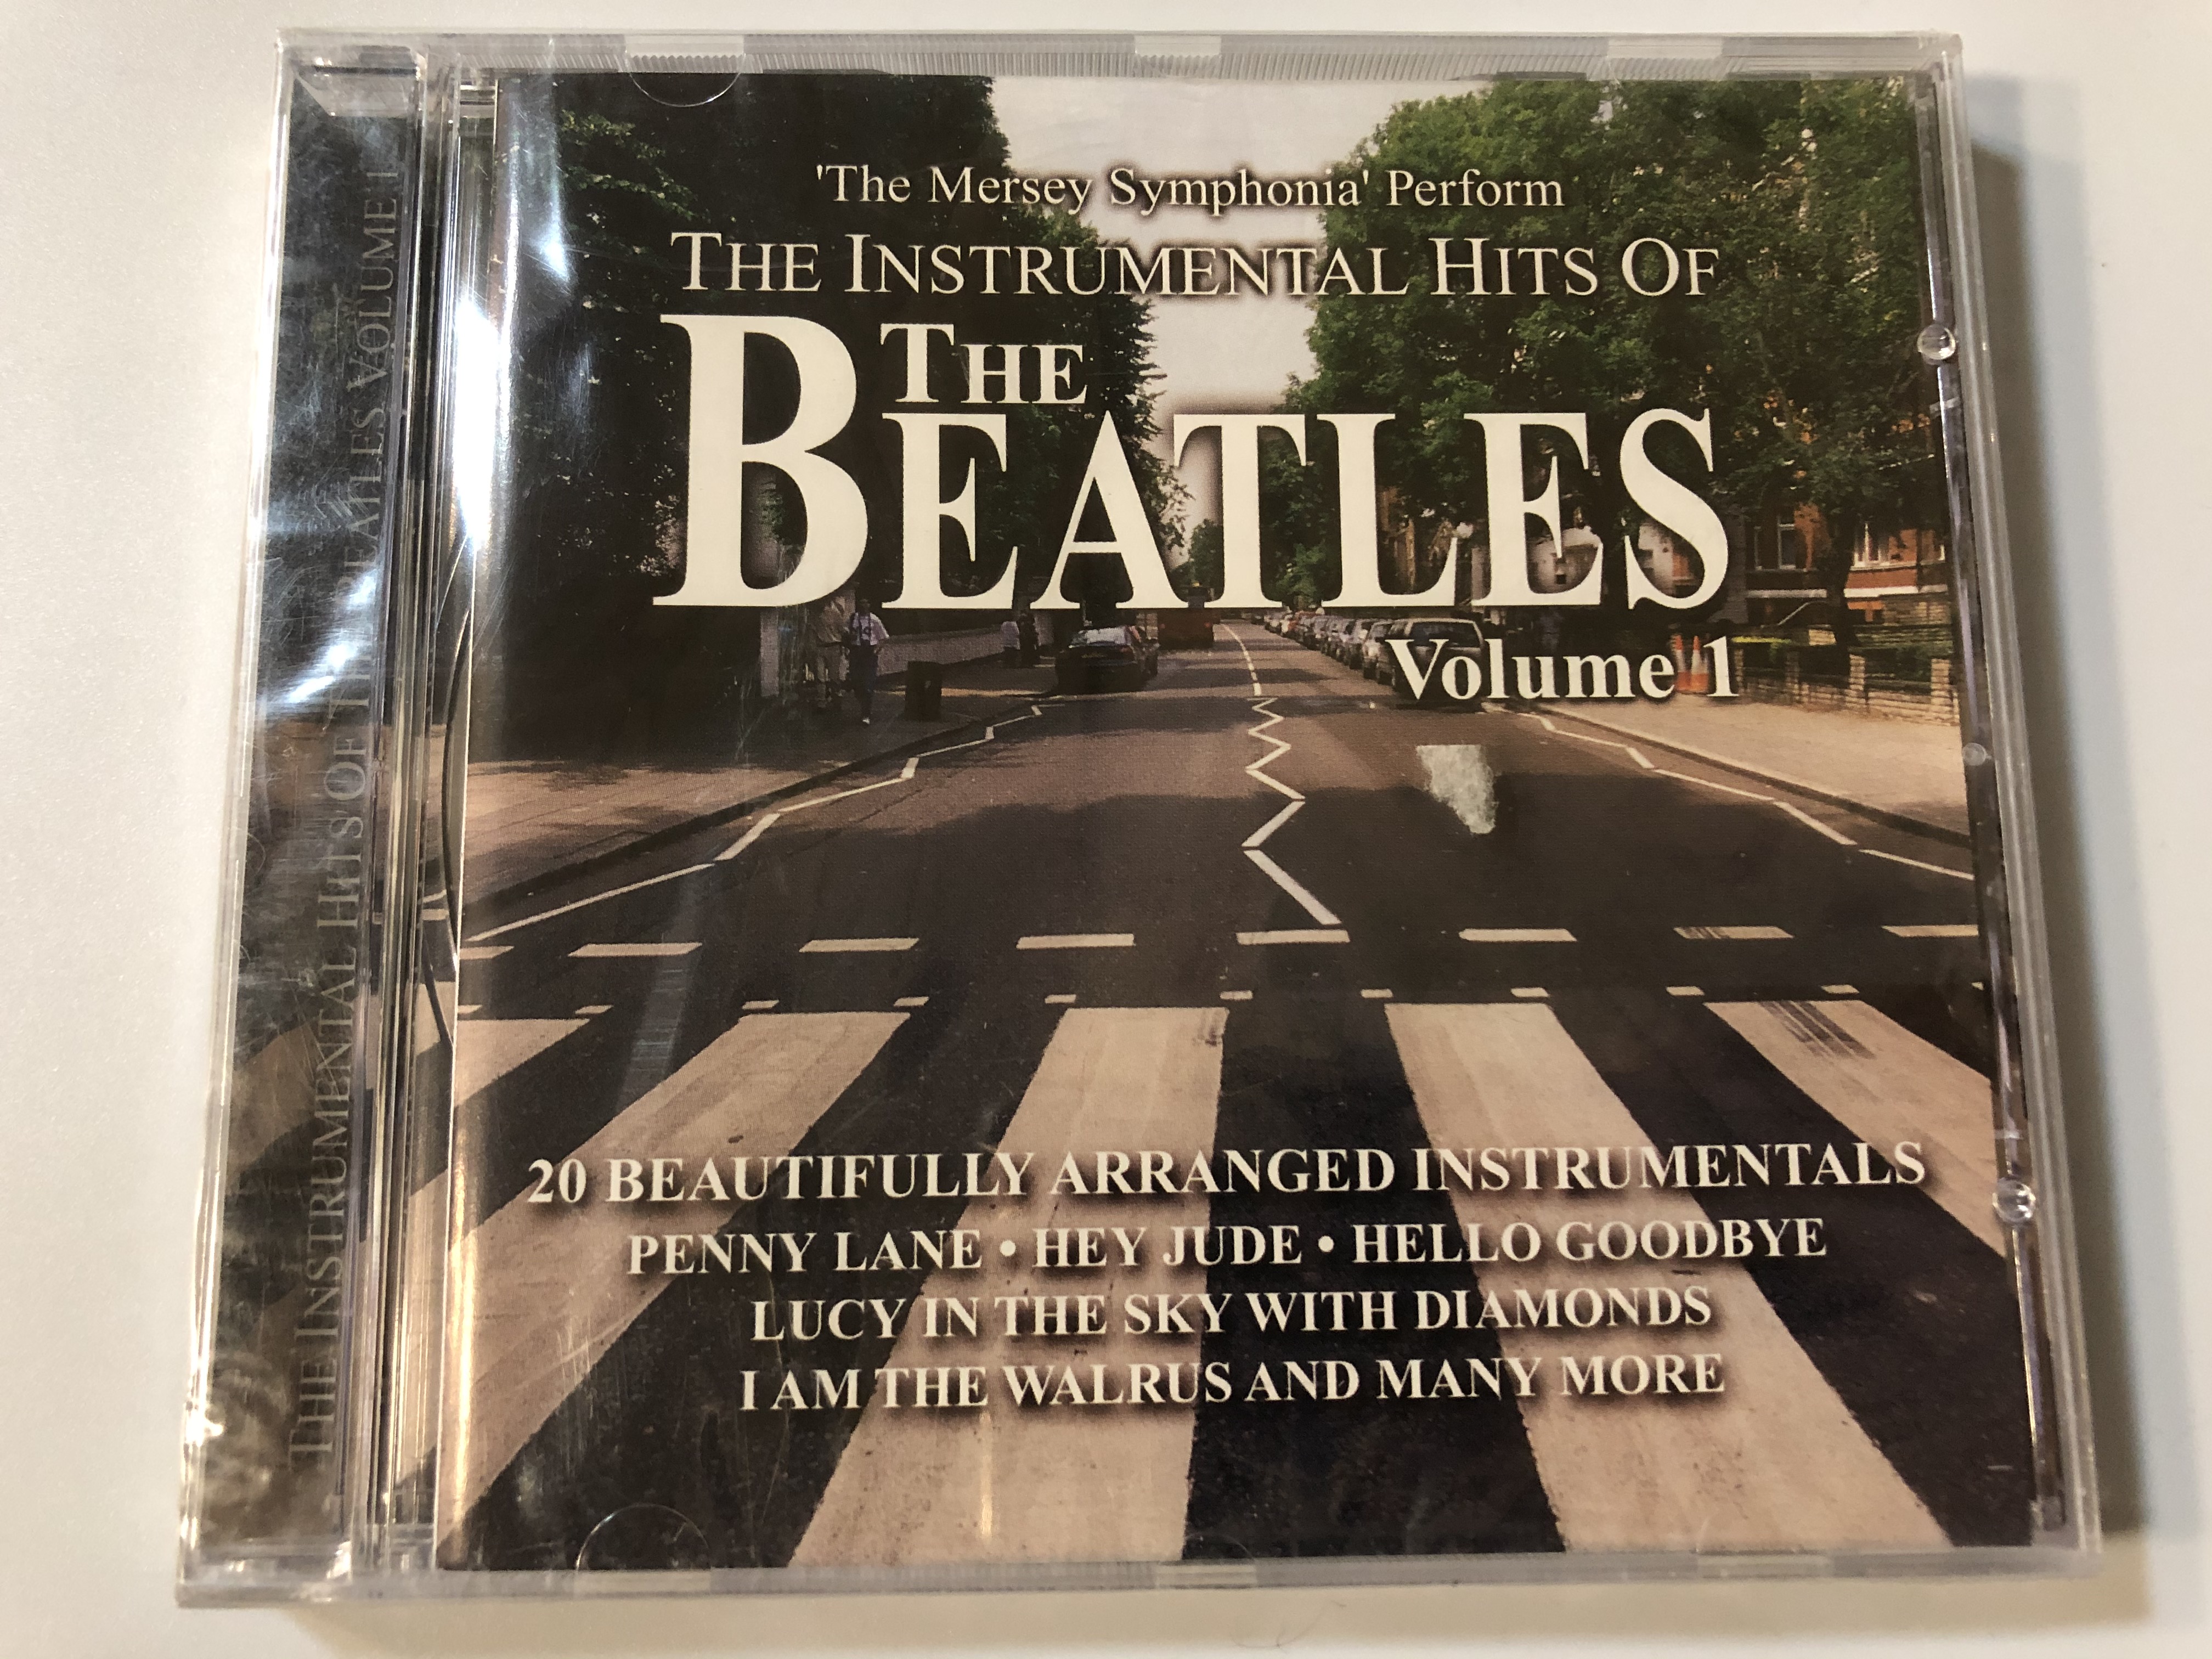 the-mersey-symphonia-perform-the-instrumental-hits-of-the-beatles-volume-1-20-beautifully-arranged-instrumentals-penny-lane-hey-jude-hello-goodbye-lucy-in-the-sky-with-diamonds-musicba-1-.jpg